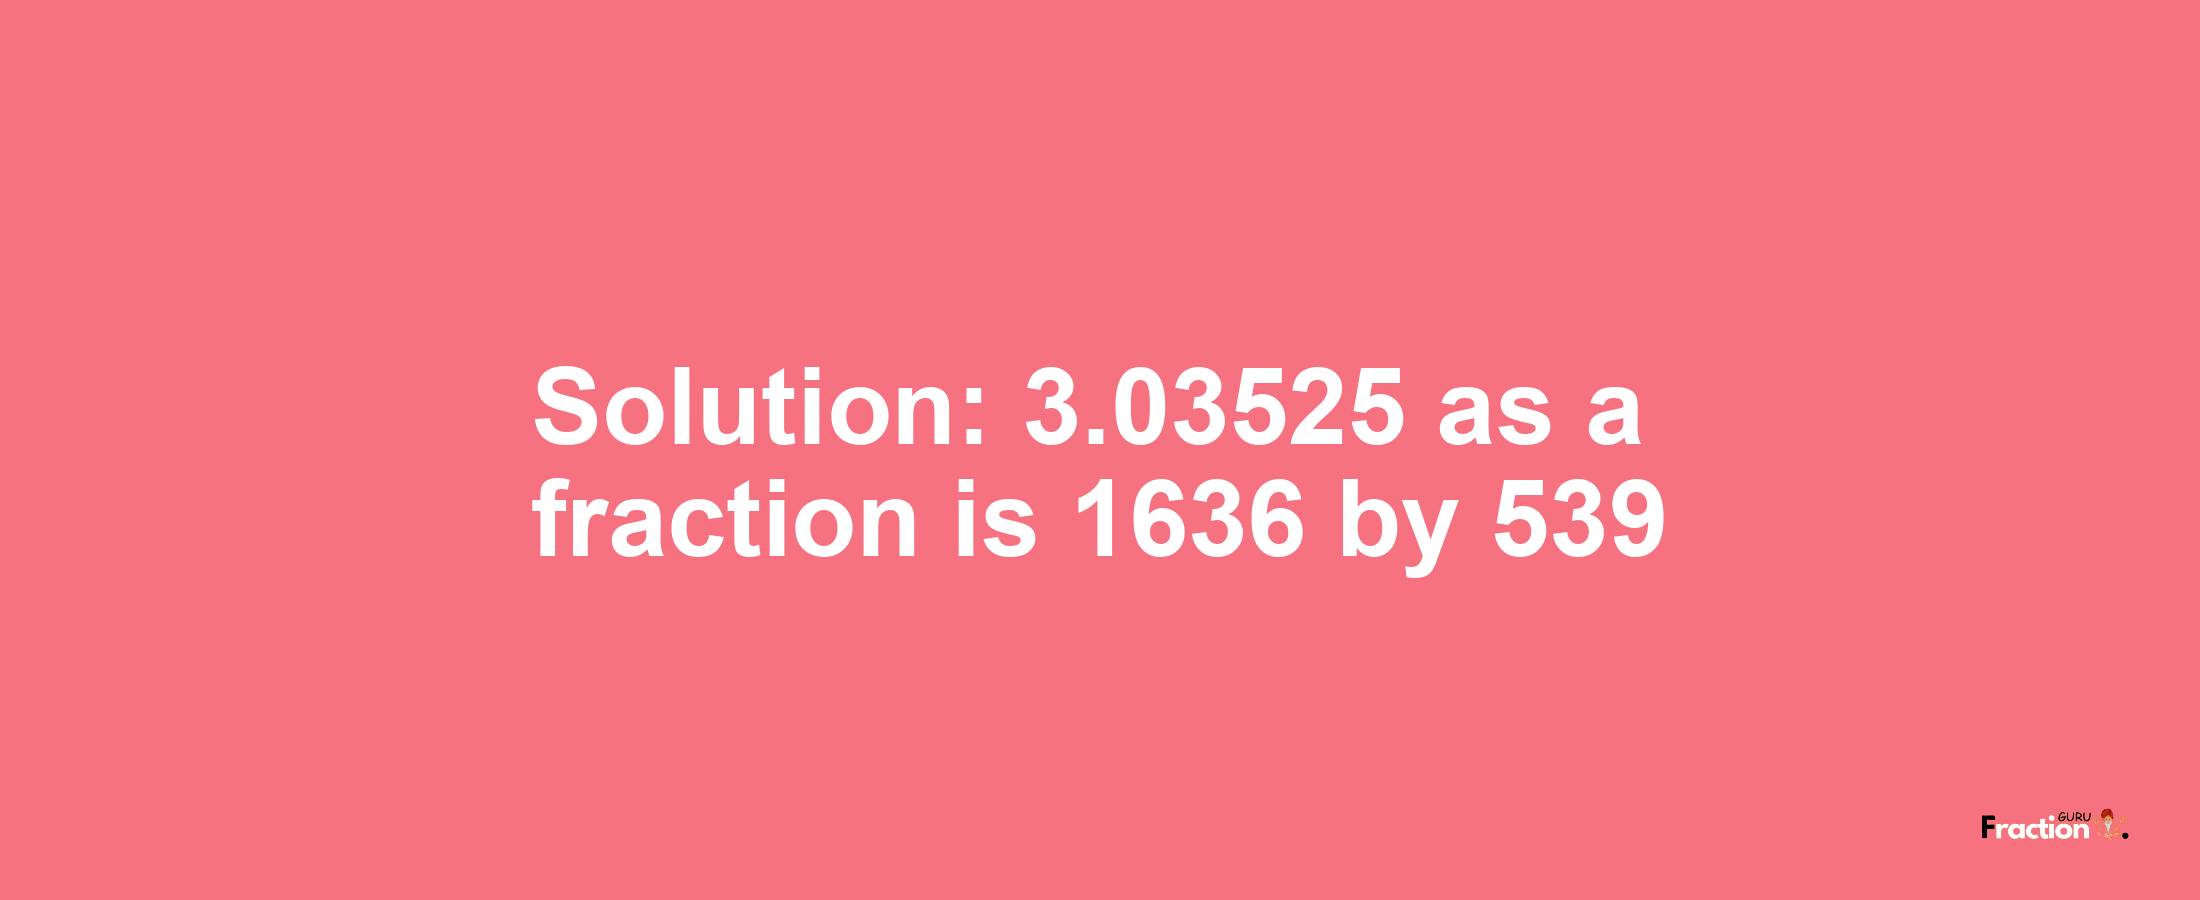 Solution:3.03525 as a fraction is 1636/539